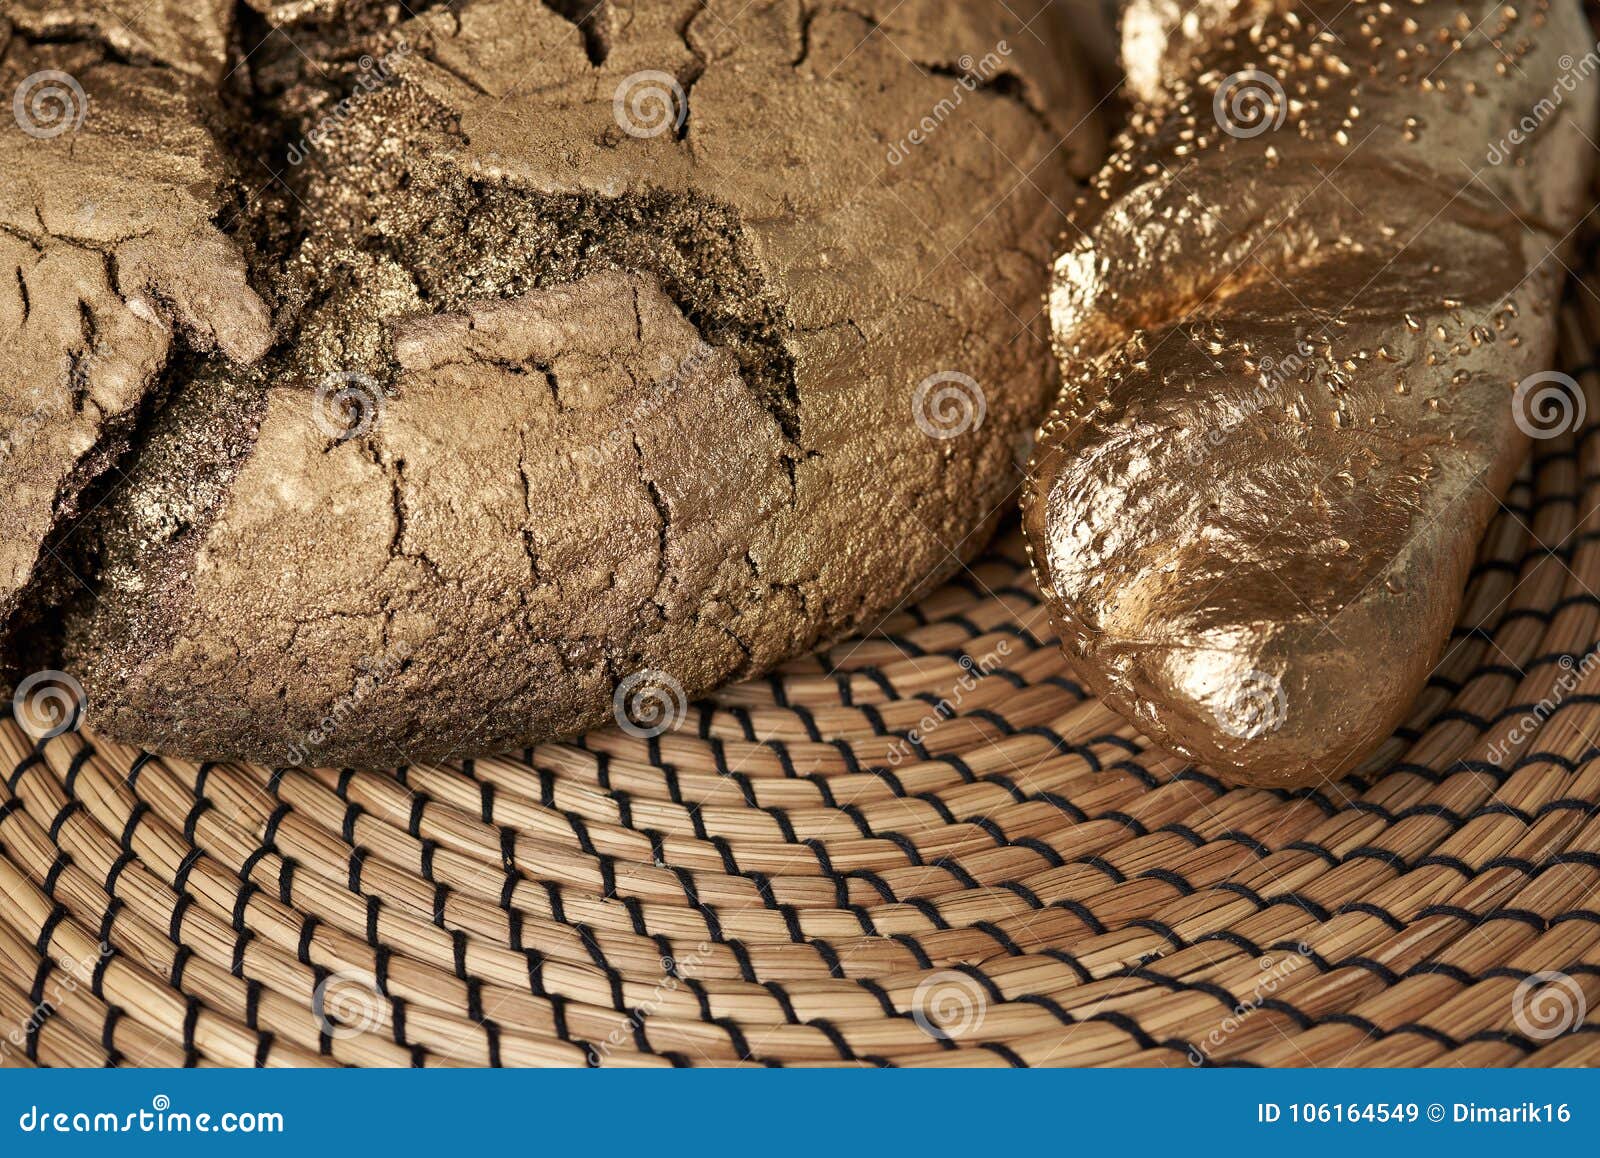 Gold baked bread stock image. Image of ingredient, summer - 106164549